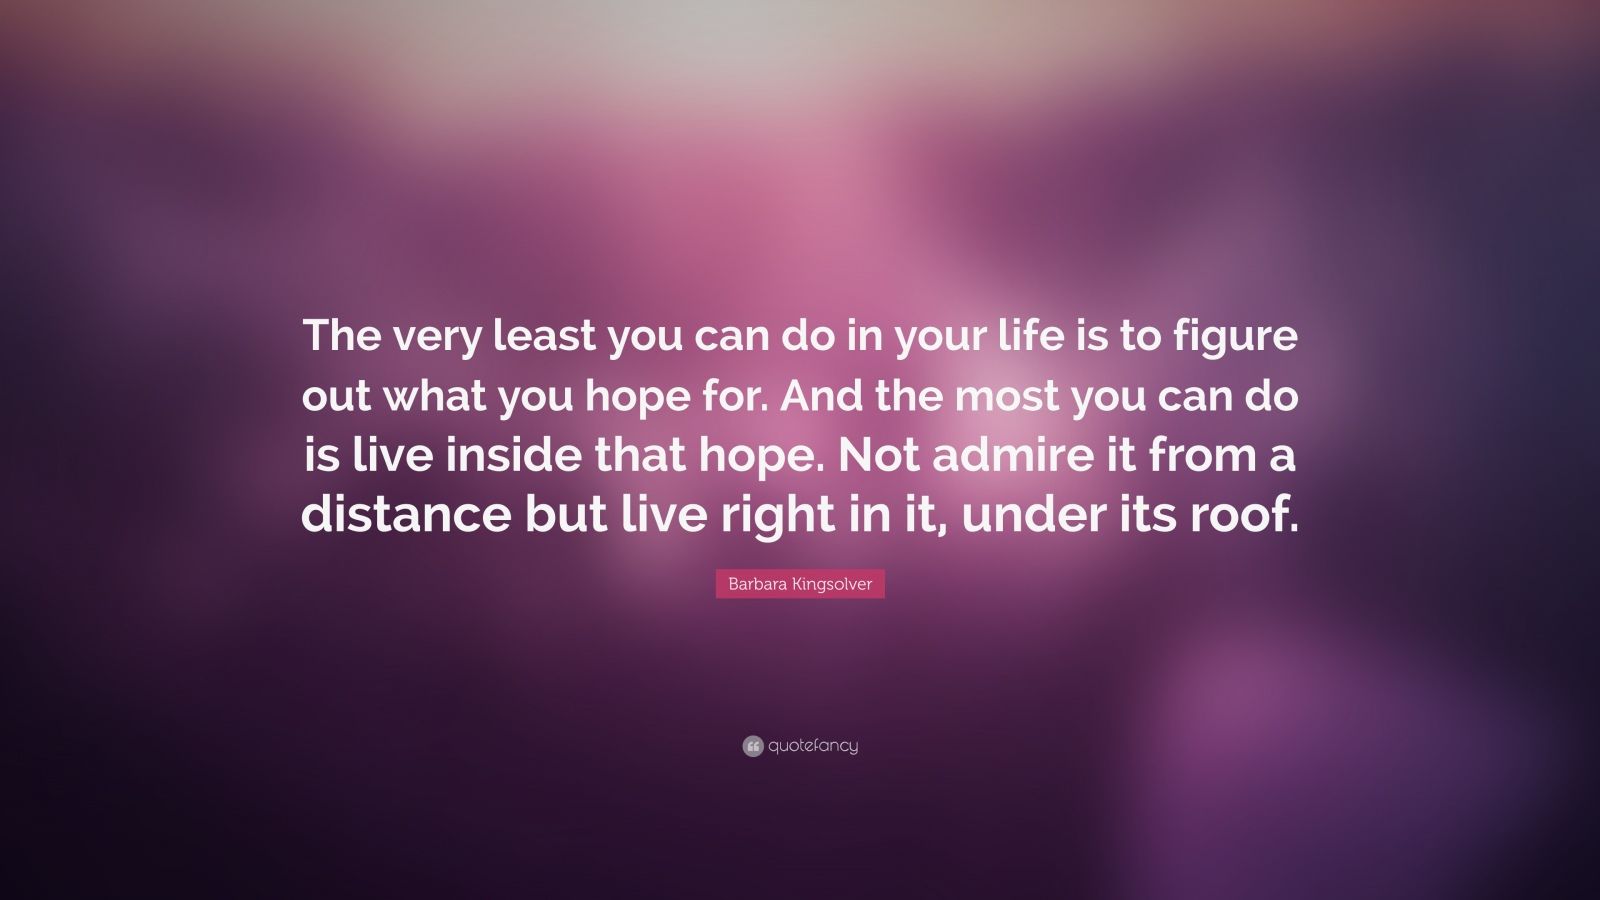 Barbara Kingsolver Quote: “The very least you can do in your life is to ...